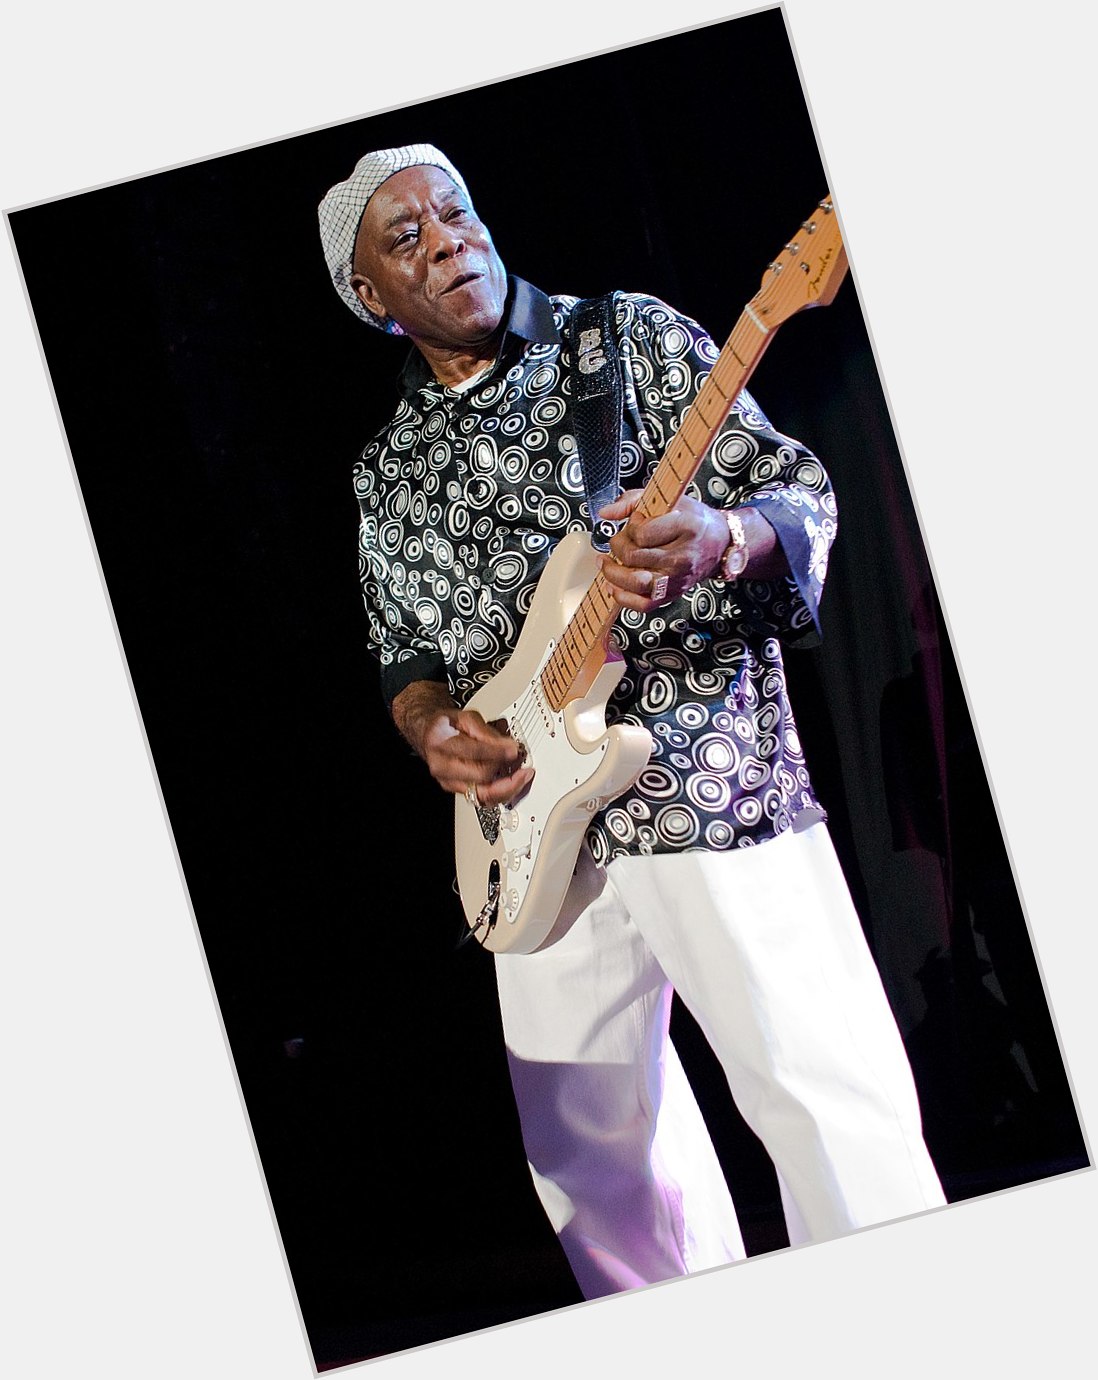 Happy birthday to the greatest guitarist in the world, Buddy Guy, who was born July 30, 1936 in Lettsworth, LA. 